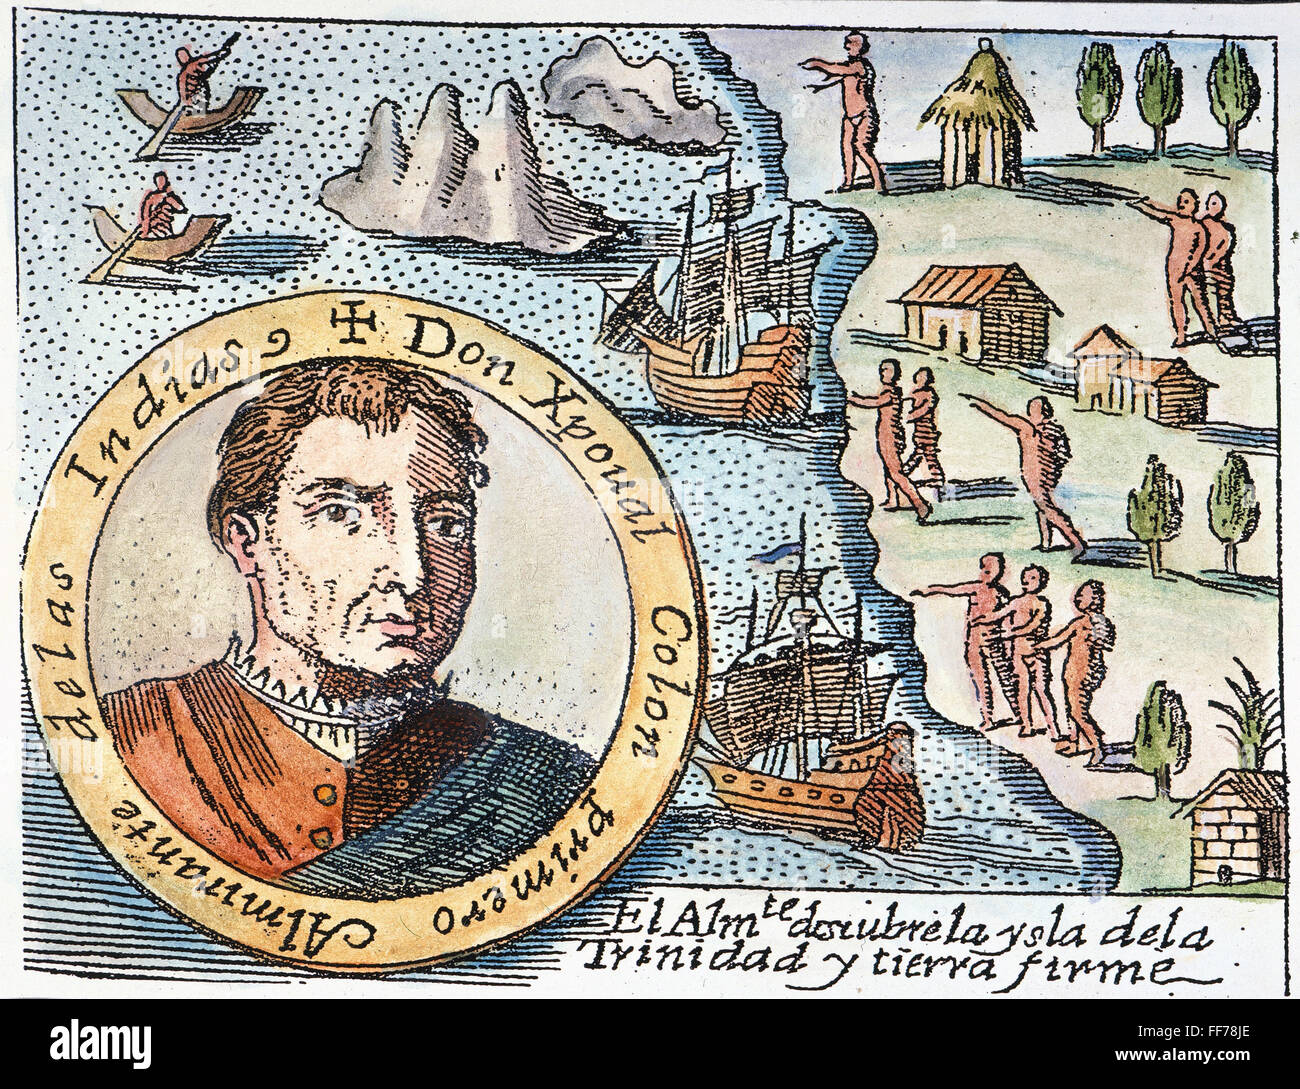 COLUMBUS: TRINIDAD, 1498. /nChristopher Columbus and his men discovering the three-peaked island of Trinidad (top left) in 1498: Spanish engraving, 1730. Stock Photo